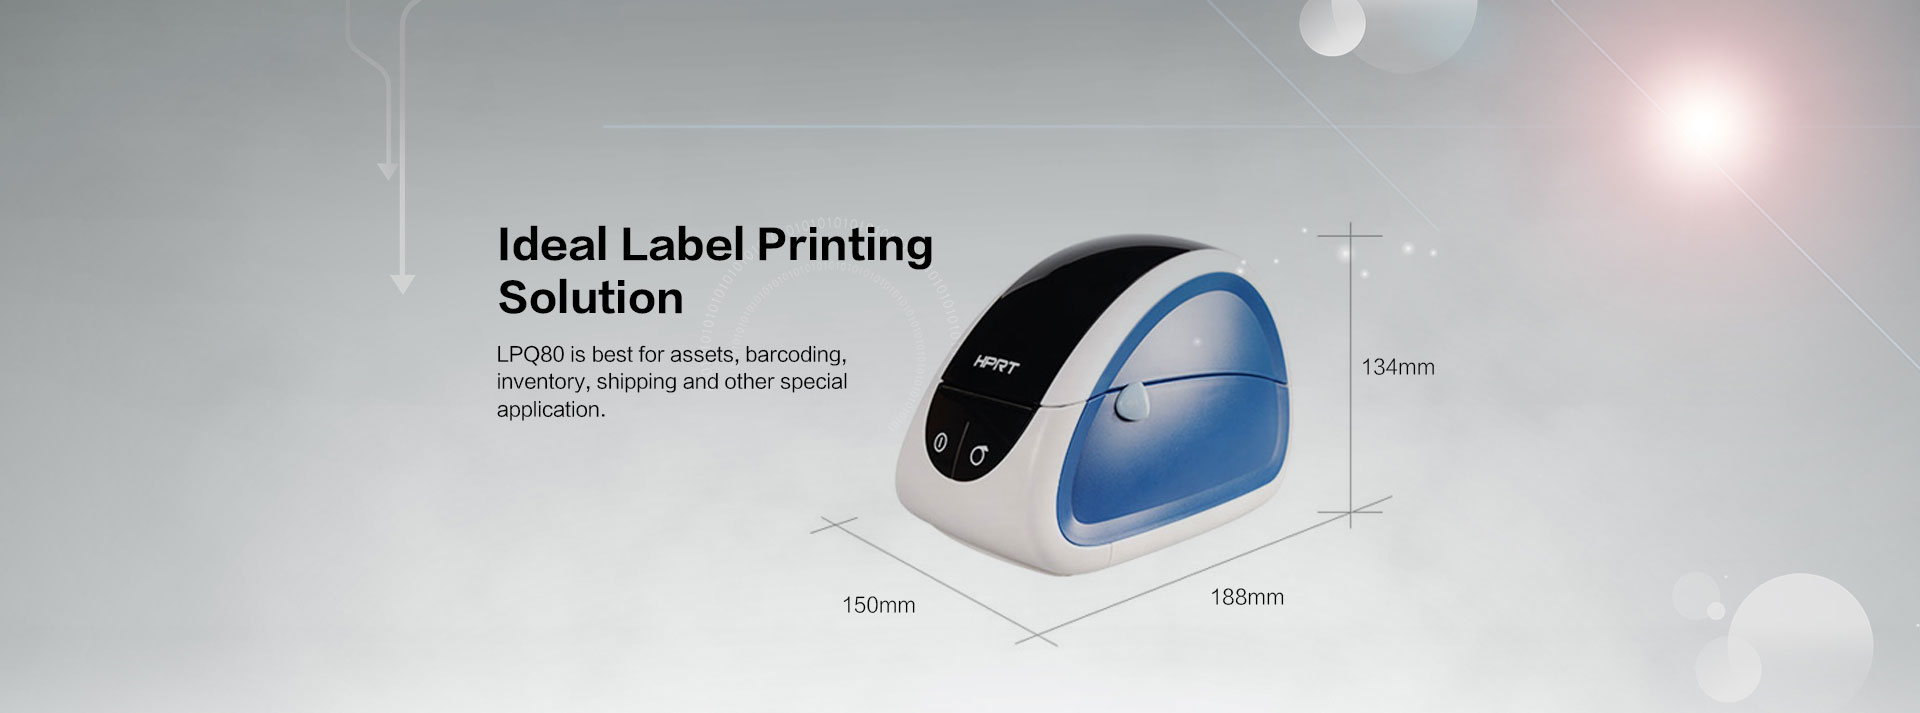 label printer for barcoding, inventory